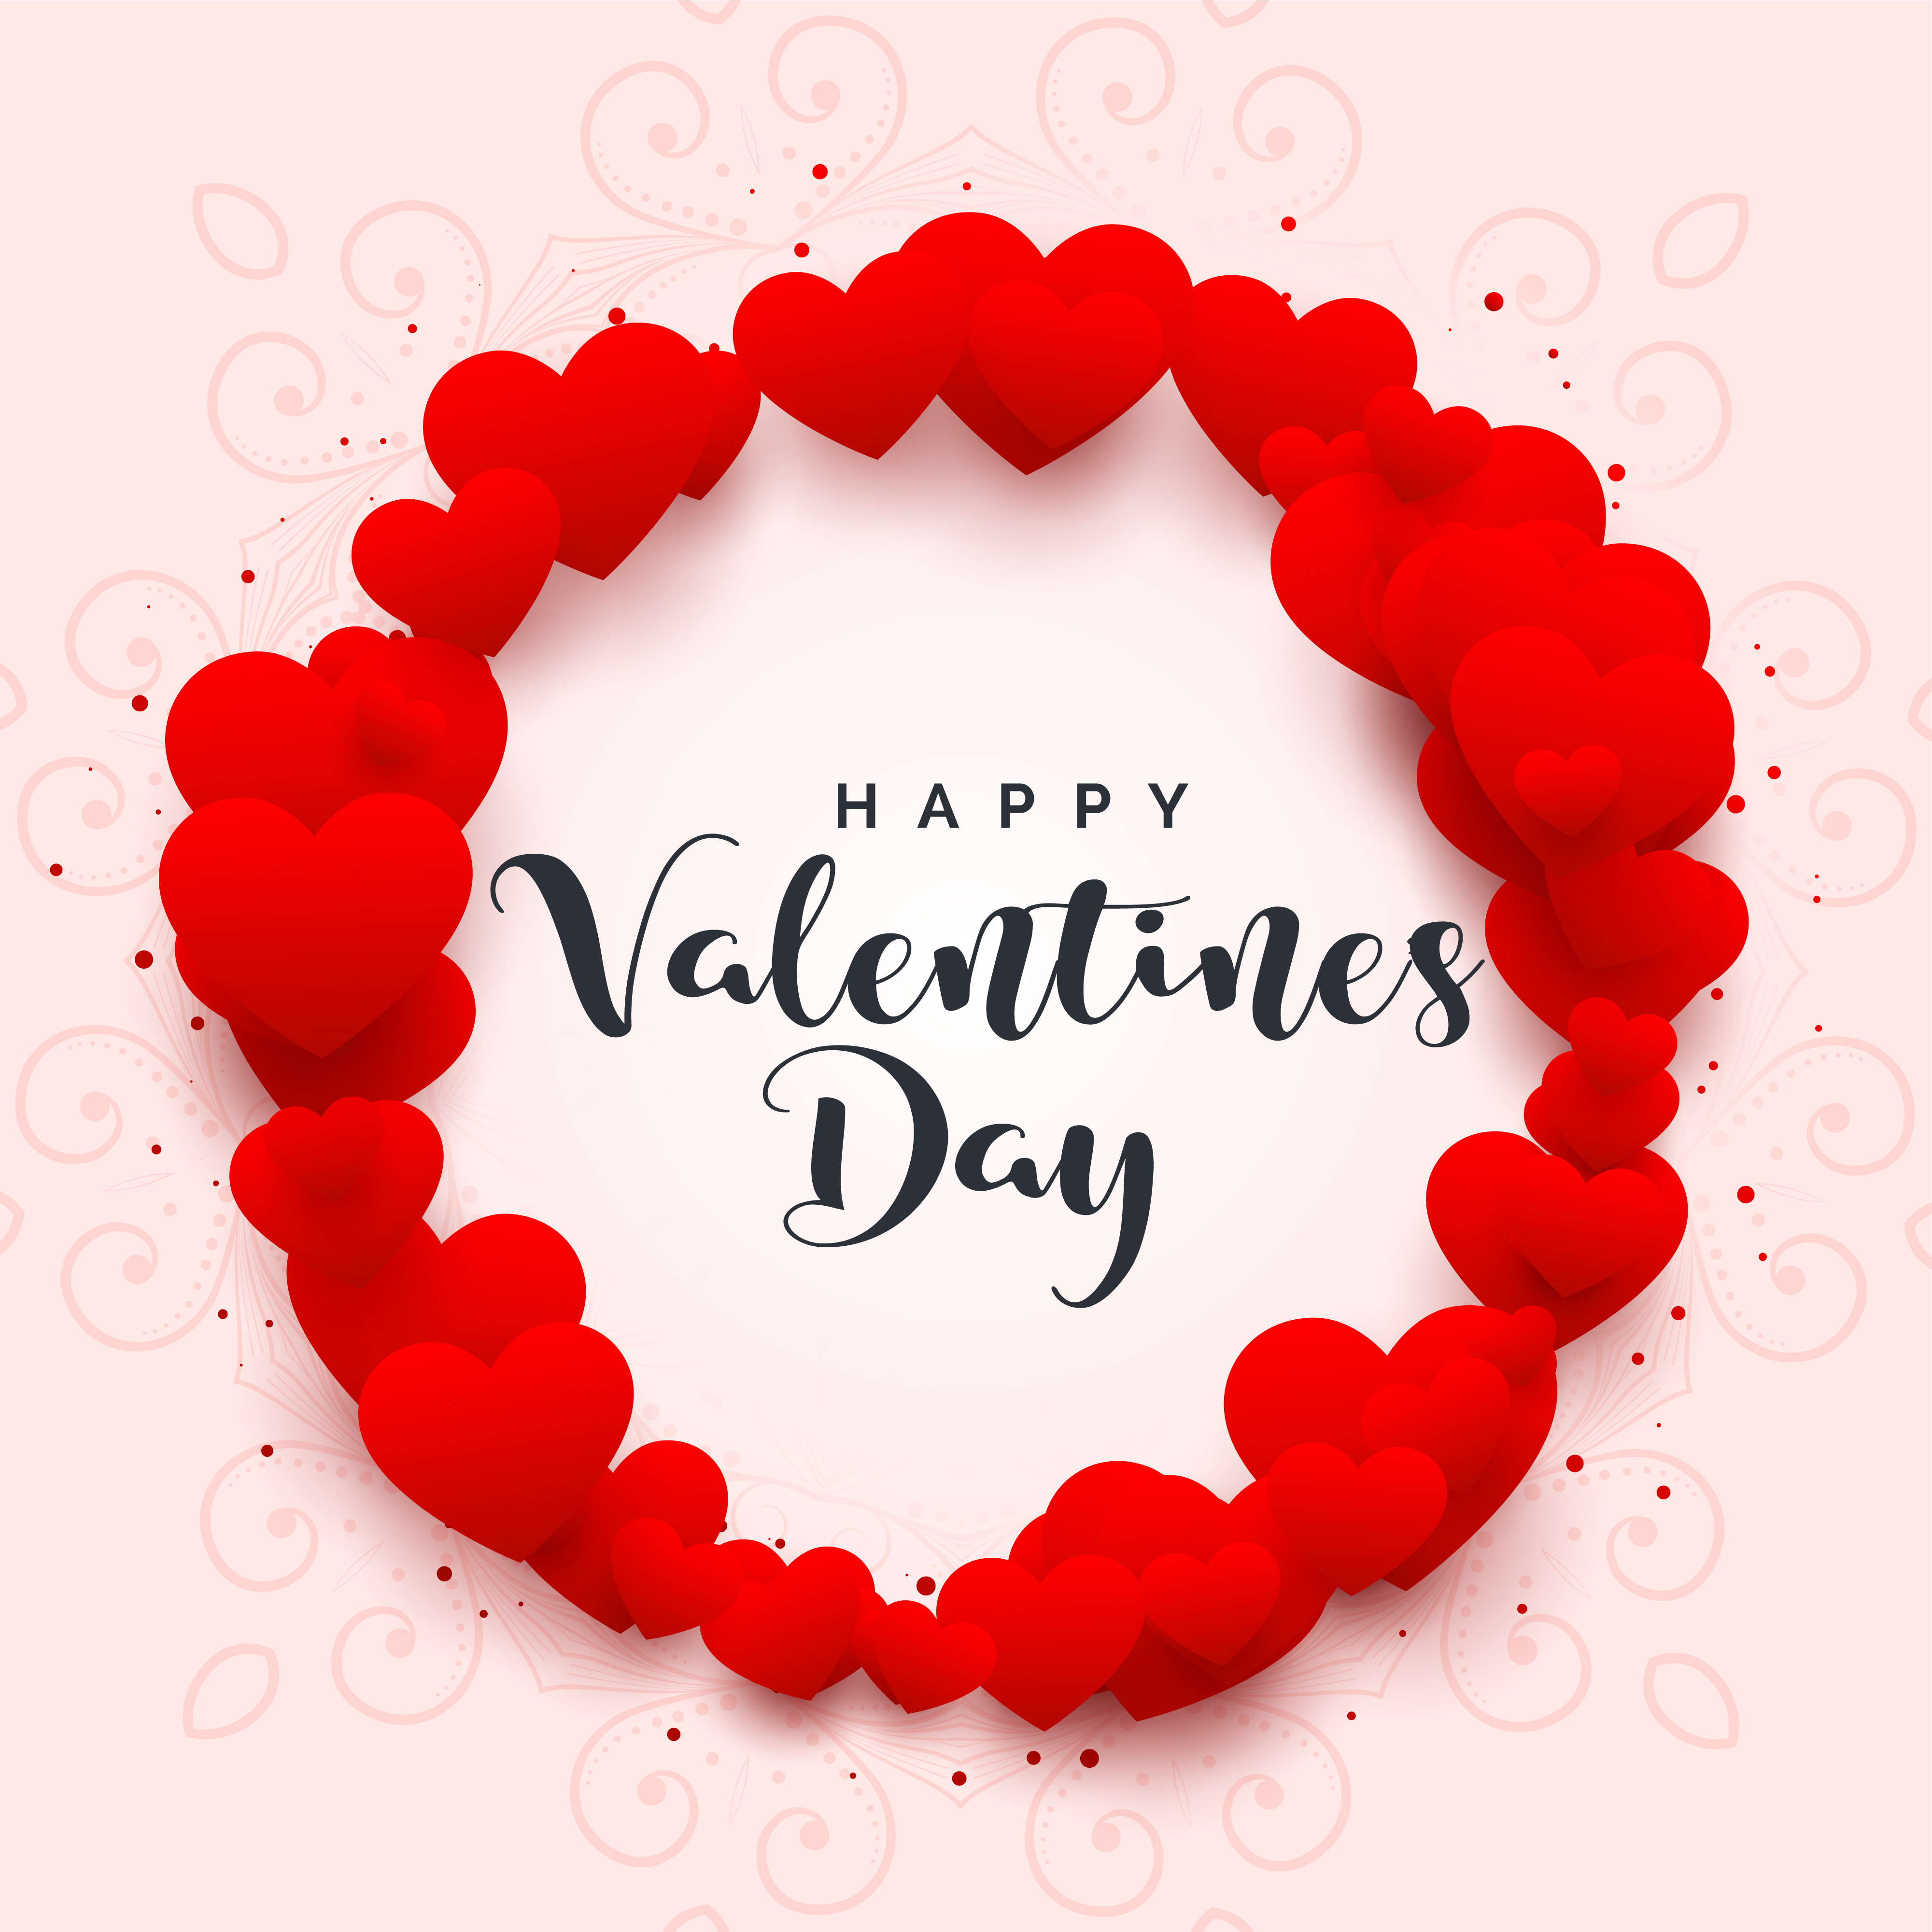 hearts frame for happy valentines day - Download Free Vector Art, Stock Graphics & Images